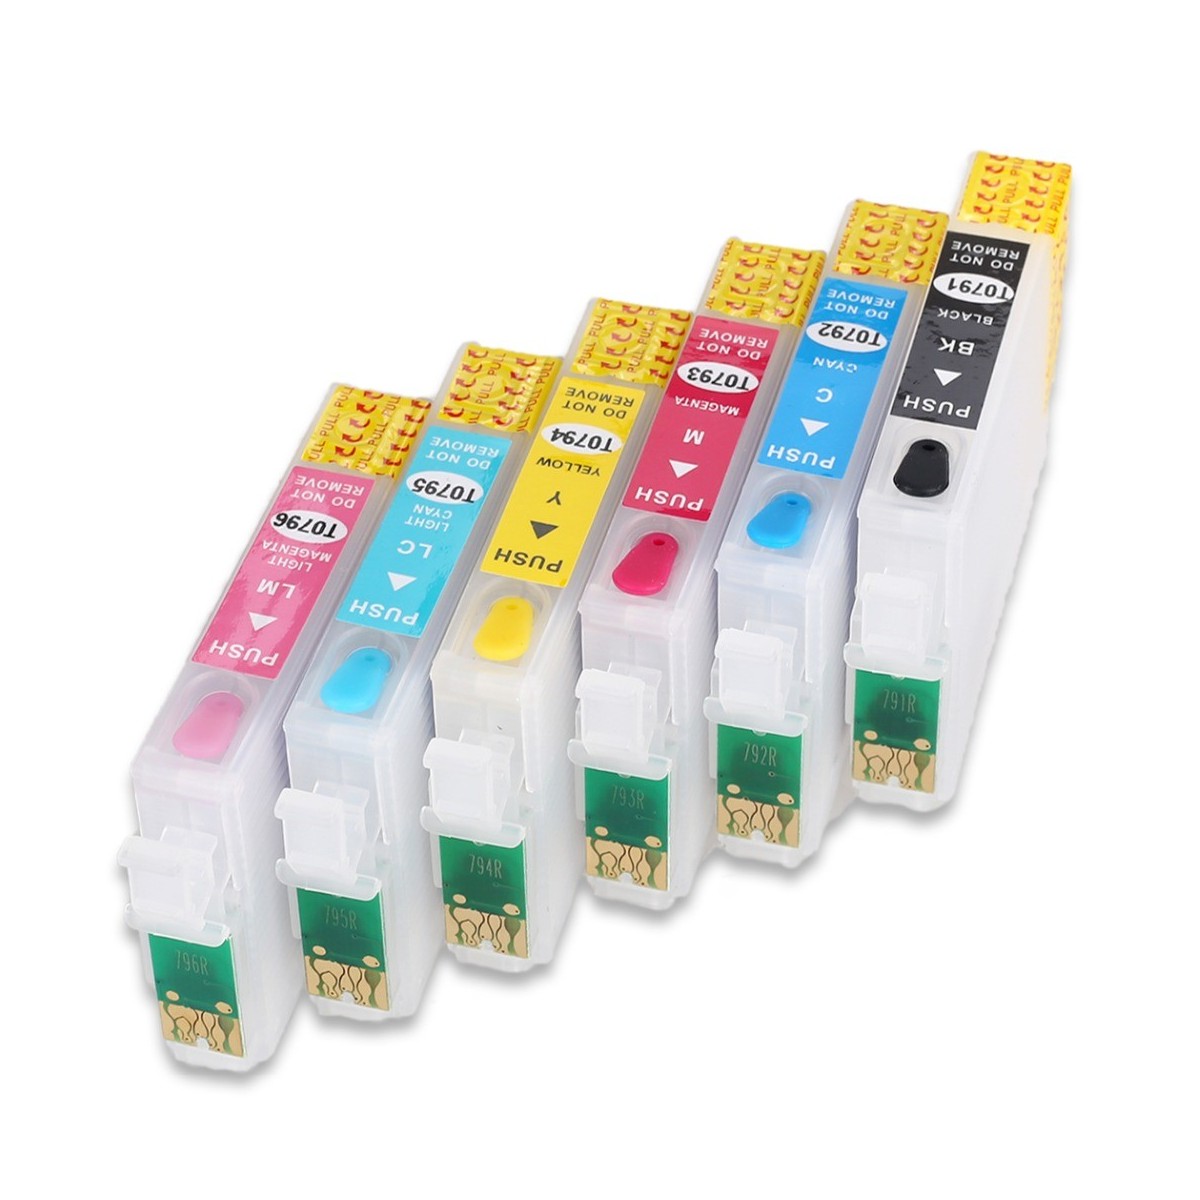 6 Cartouches rechargeables Epson T0791-0796